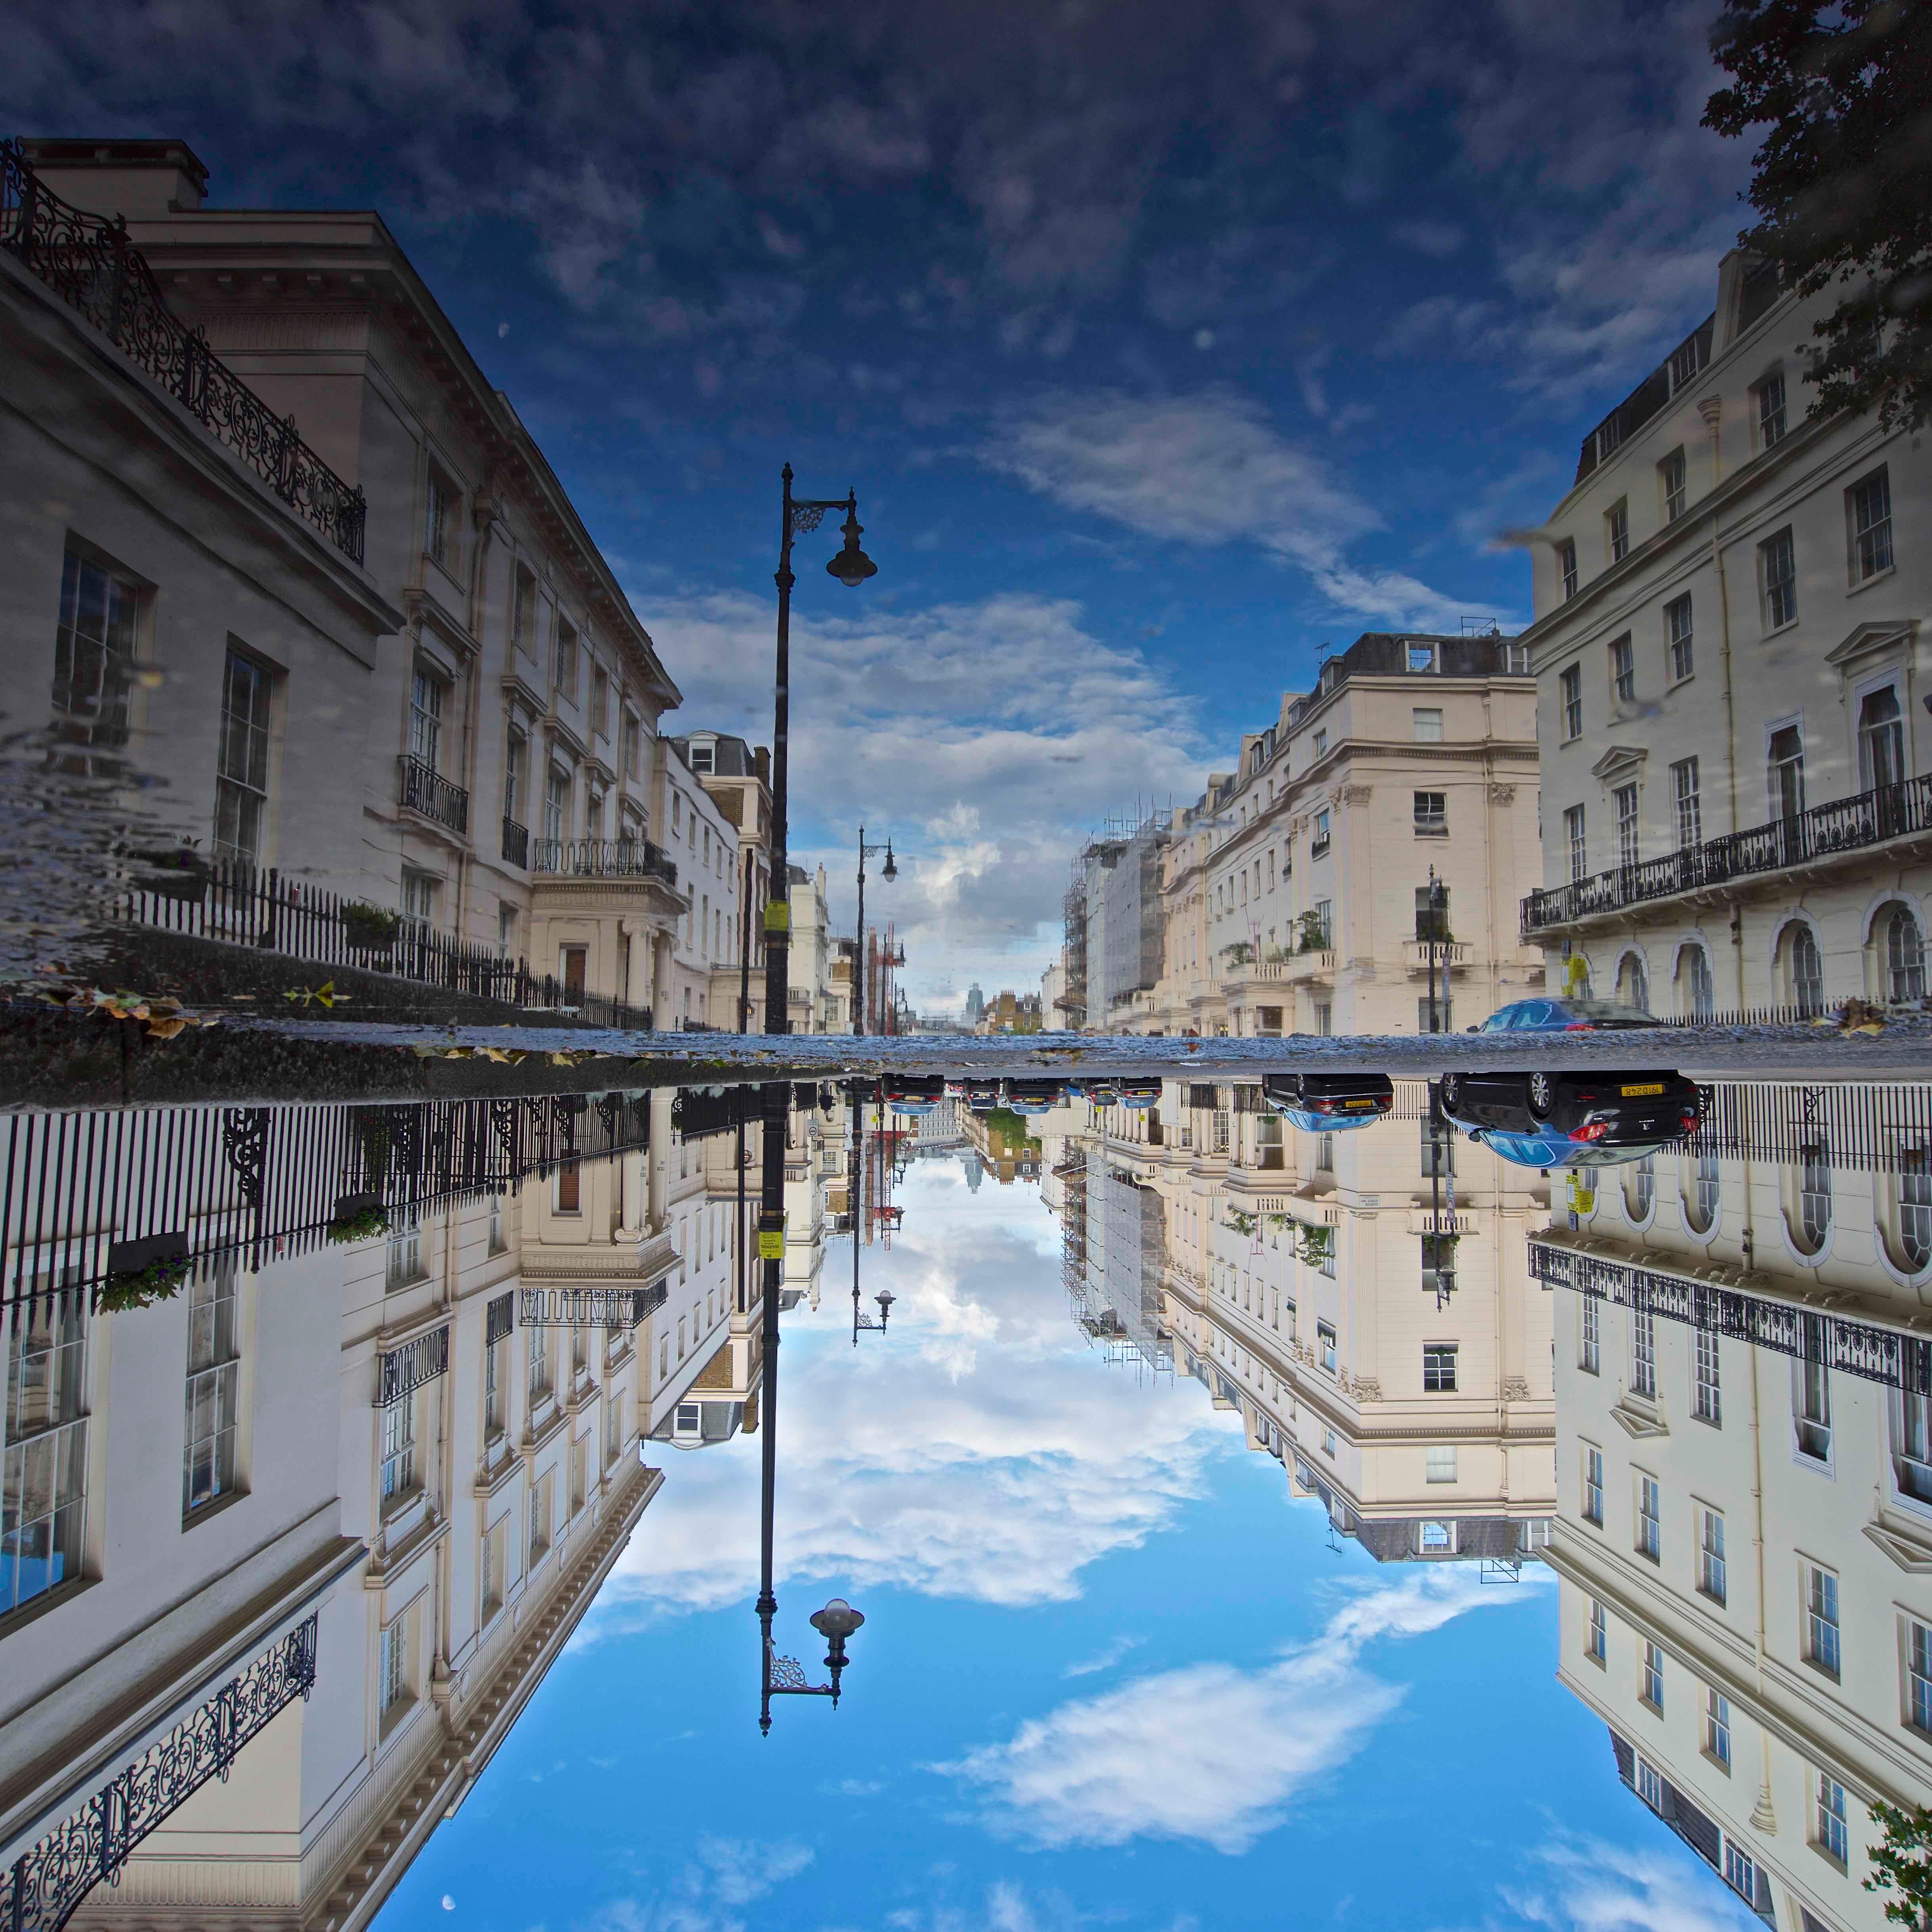 Philip Shalam Color Photograph -  BELGRAVIA, LONDON - INVERTED PUDDLE REFLECTION - BY PHOTOGRAPHER PHILIP SHALAM